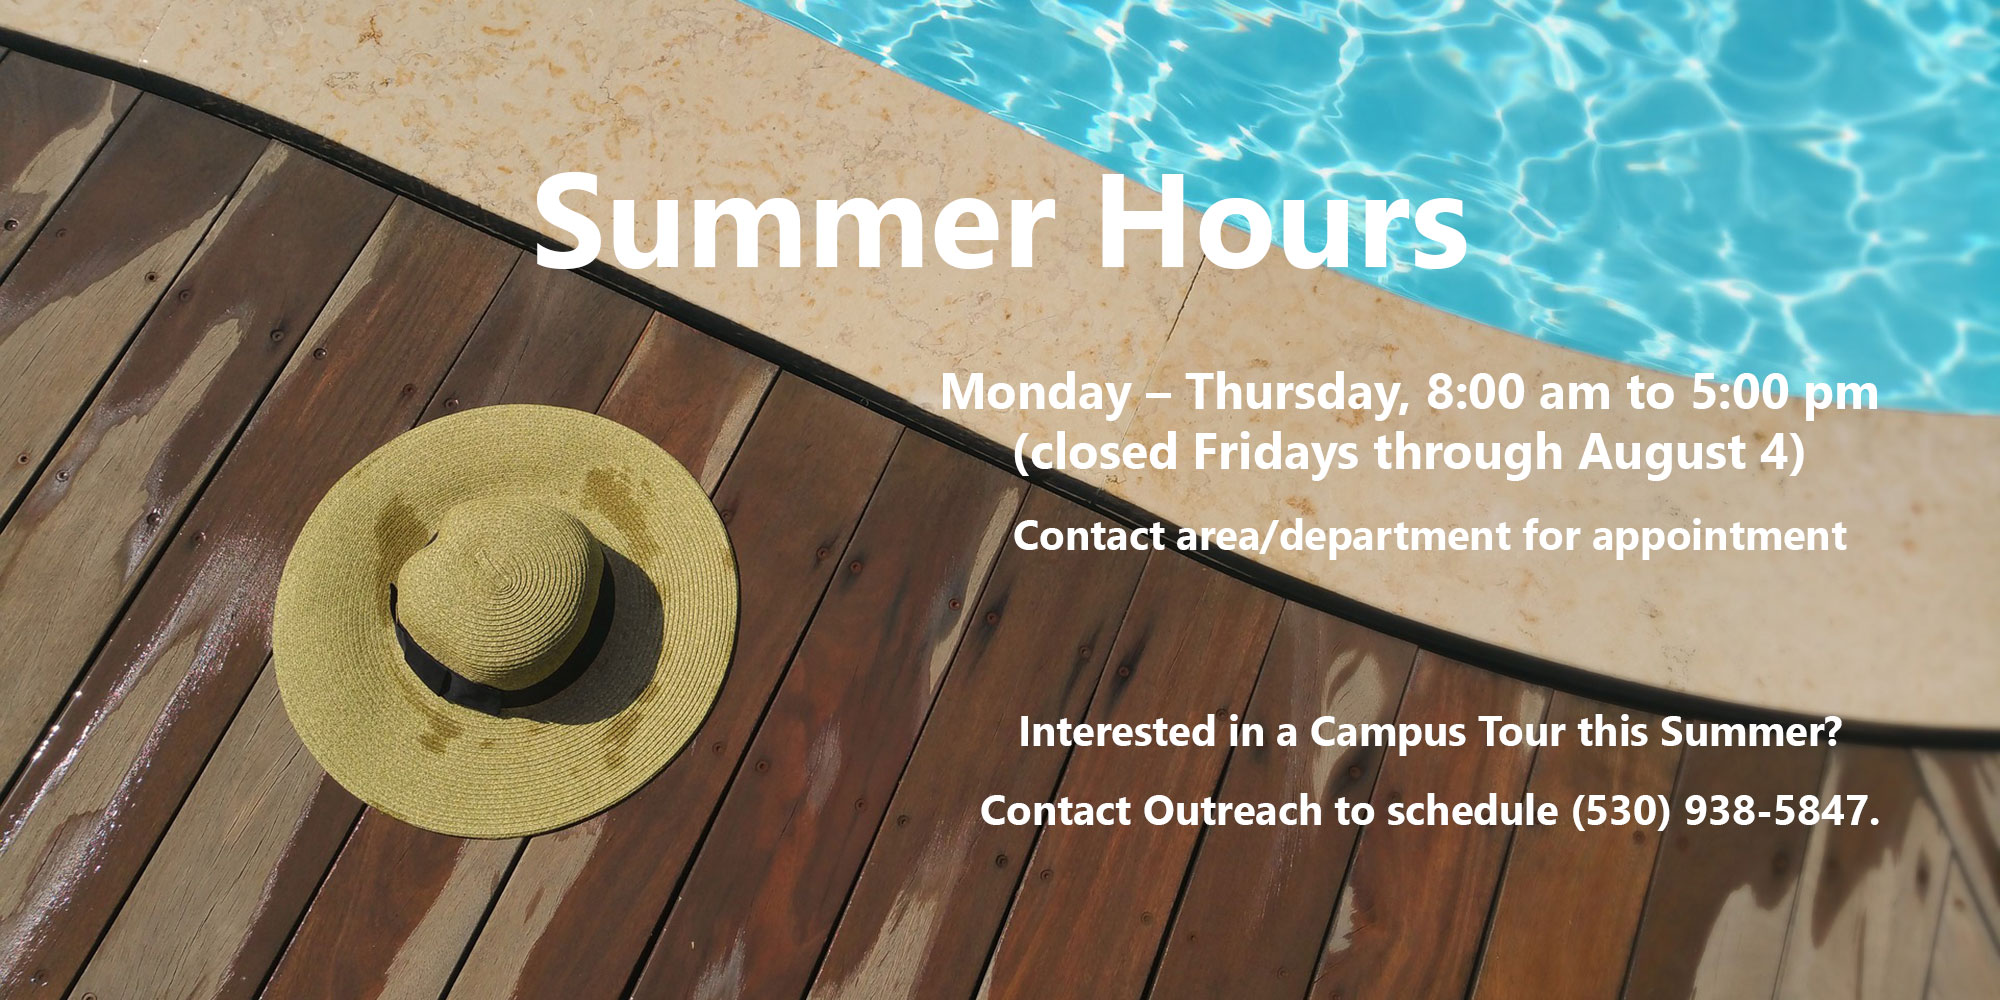 Monday-Thursday, 8:00 am to 5:00 pm. Closed Fridays through August 4. Contact area / department for appointment. Interested in a Campus Tour this Summer? Contact Outreach to schedule, (530 938-5847.